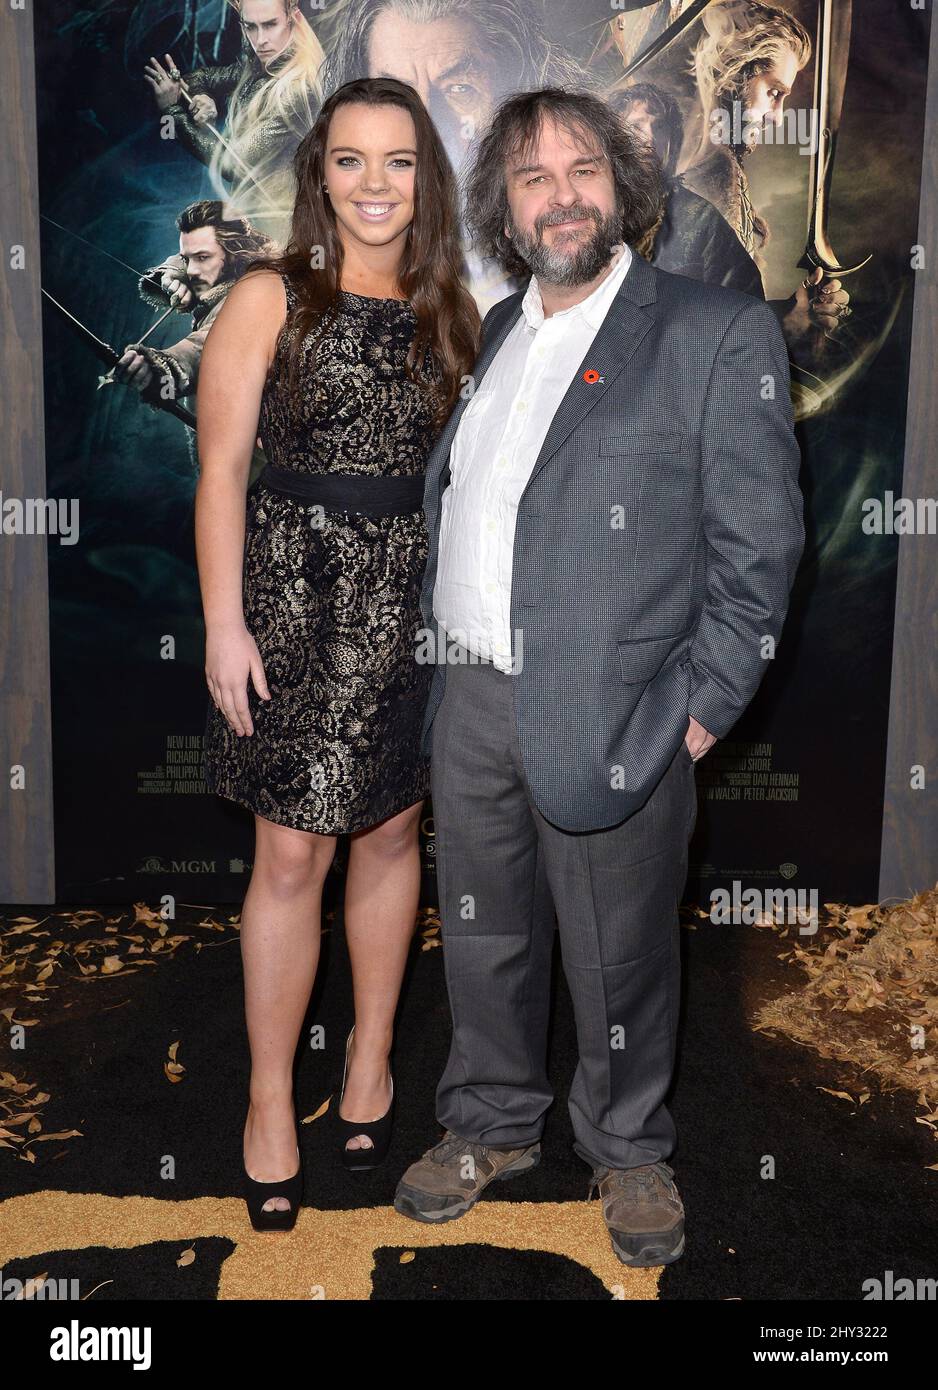 Peter Jackson attending 'The Hobbit: The Desolation Of Smaug' premiere held at Dolby Theatre in Los Angeles, USA. Stock Photo